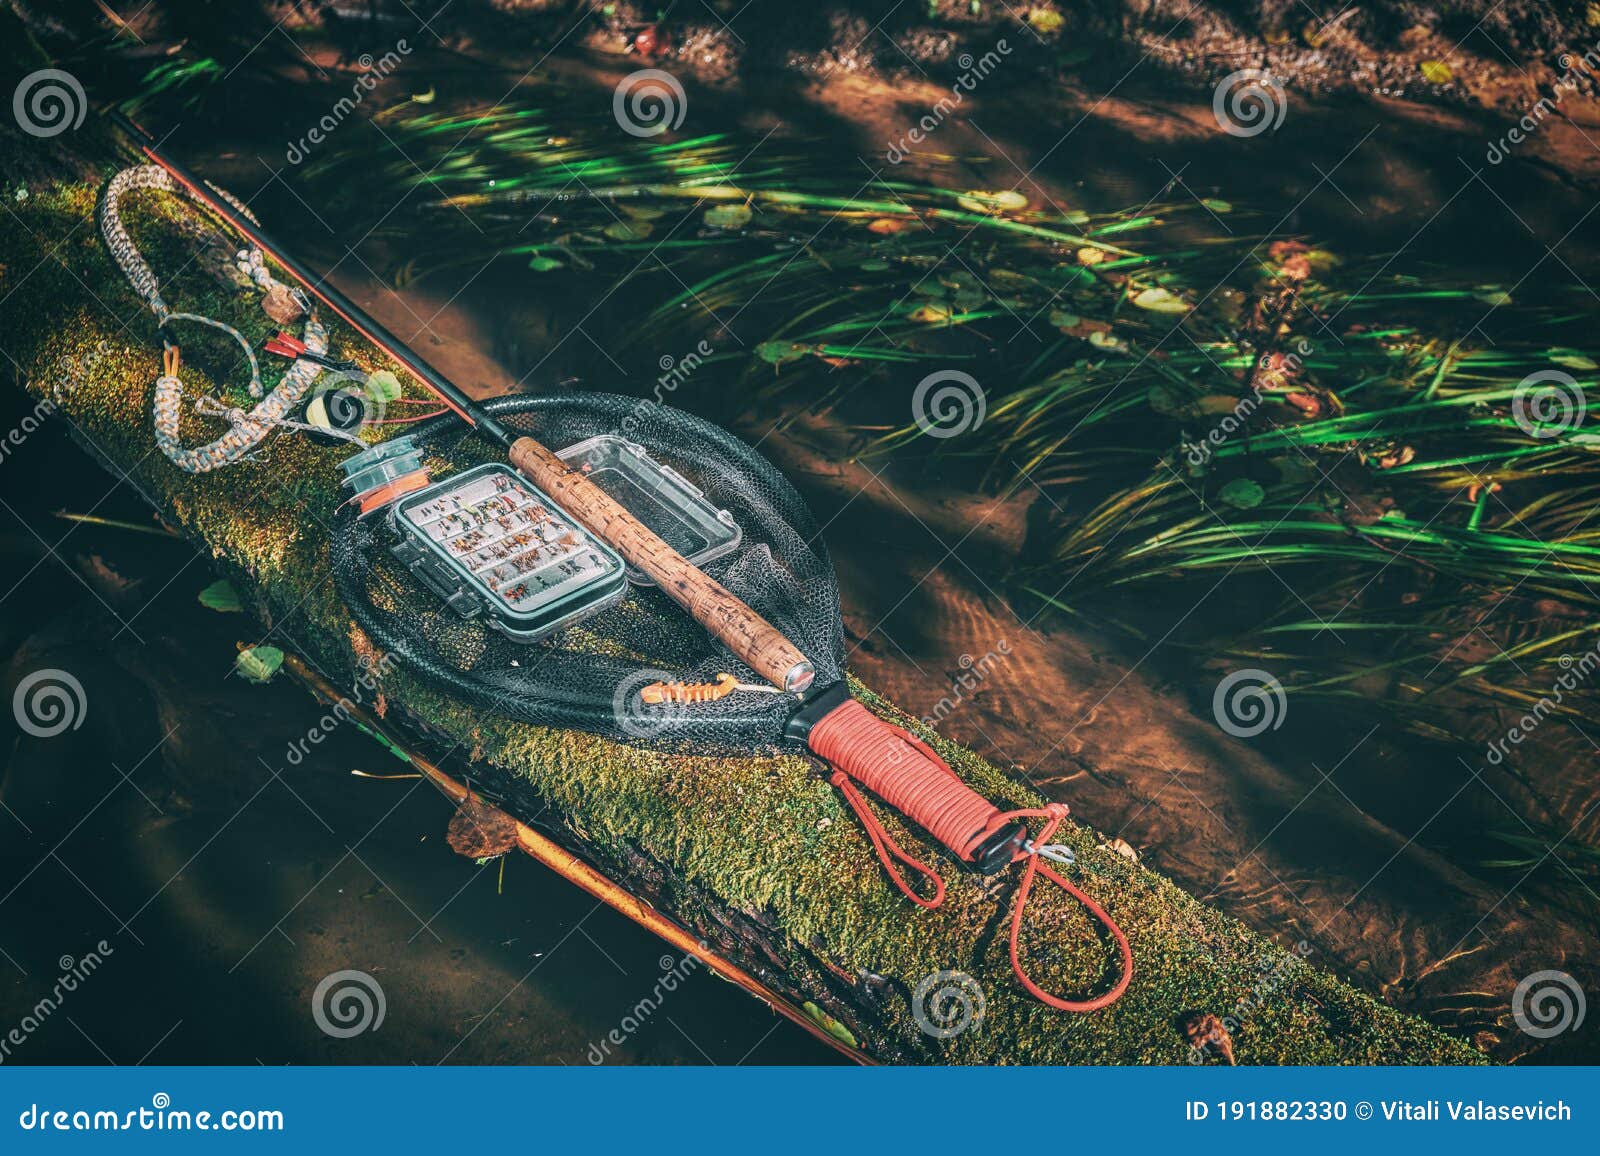 Fishing Gear Lying on the Bank of a Forest Stream. Fly Fishing and Tenkara  Stock Photo - Image of fishing, feather: 191882330